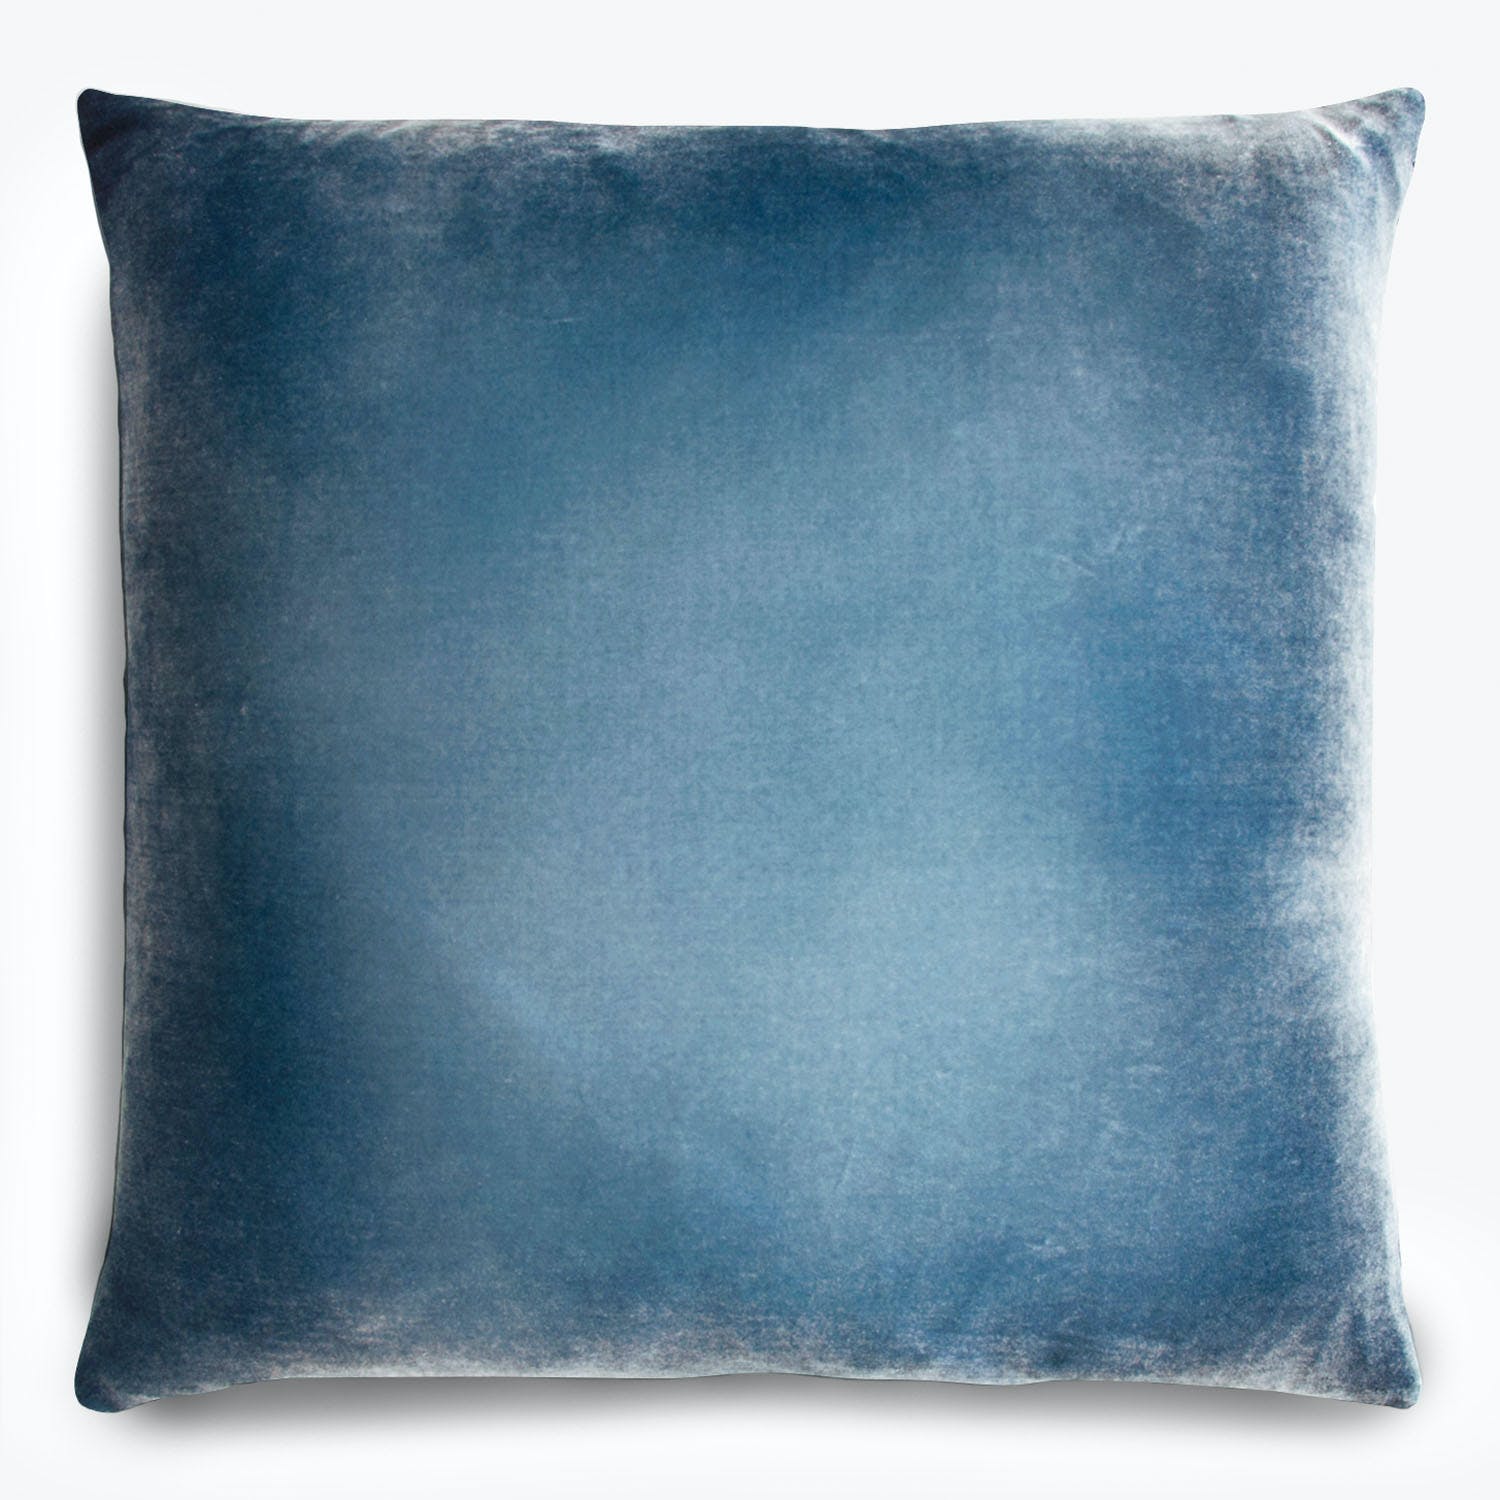 Square pillow with a gradient design in vintage blue colors.